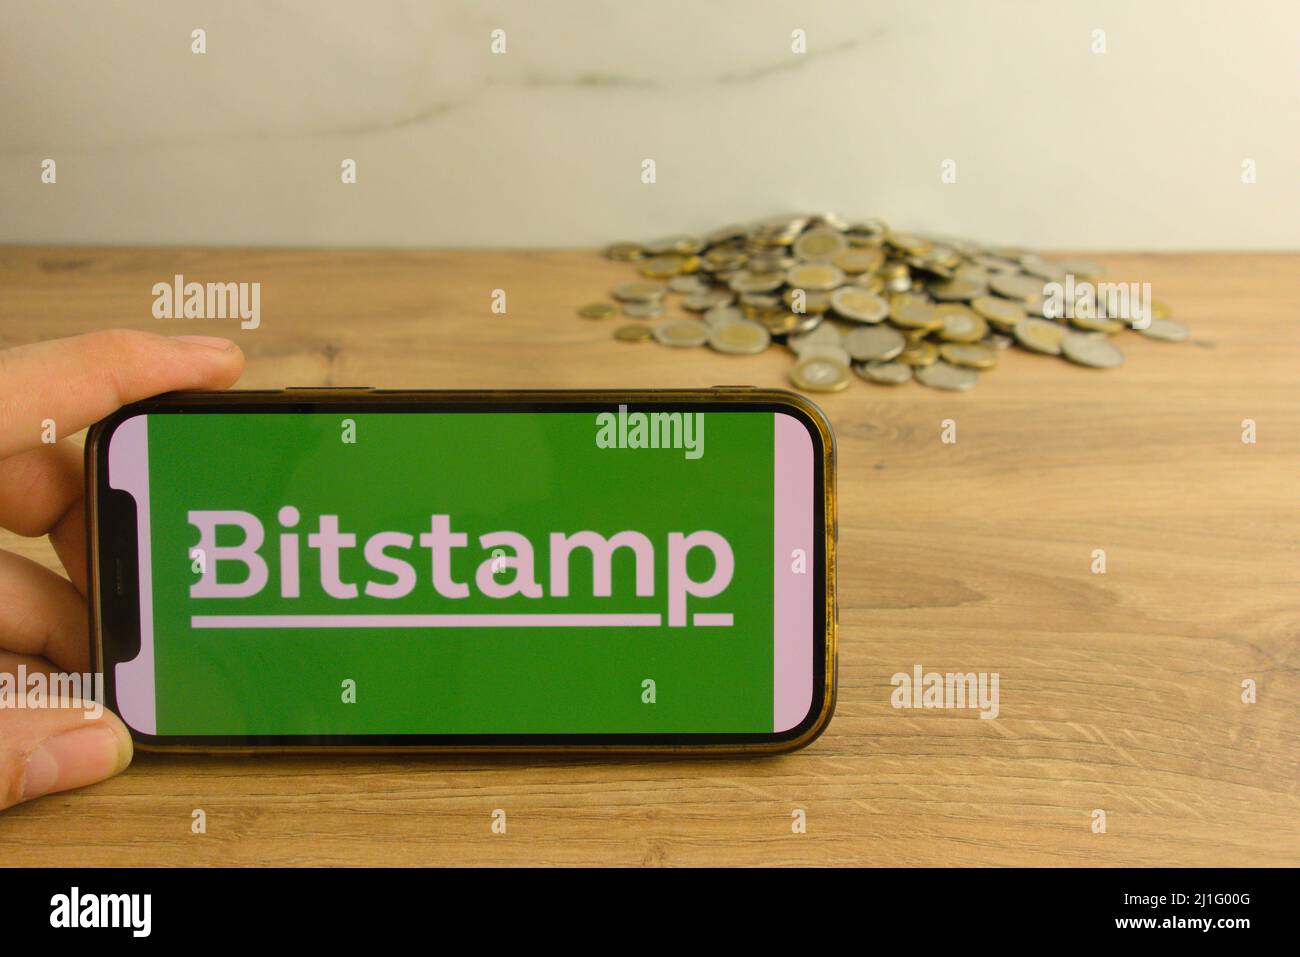 KONSKIE, POLAND - March 20, 2022: Bitstamp cryptocurrency exchange logo on mobile phone. Online trading, blockchain technology concept Stock Photo